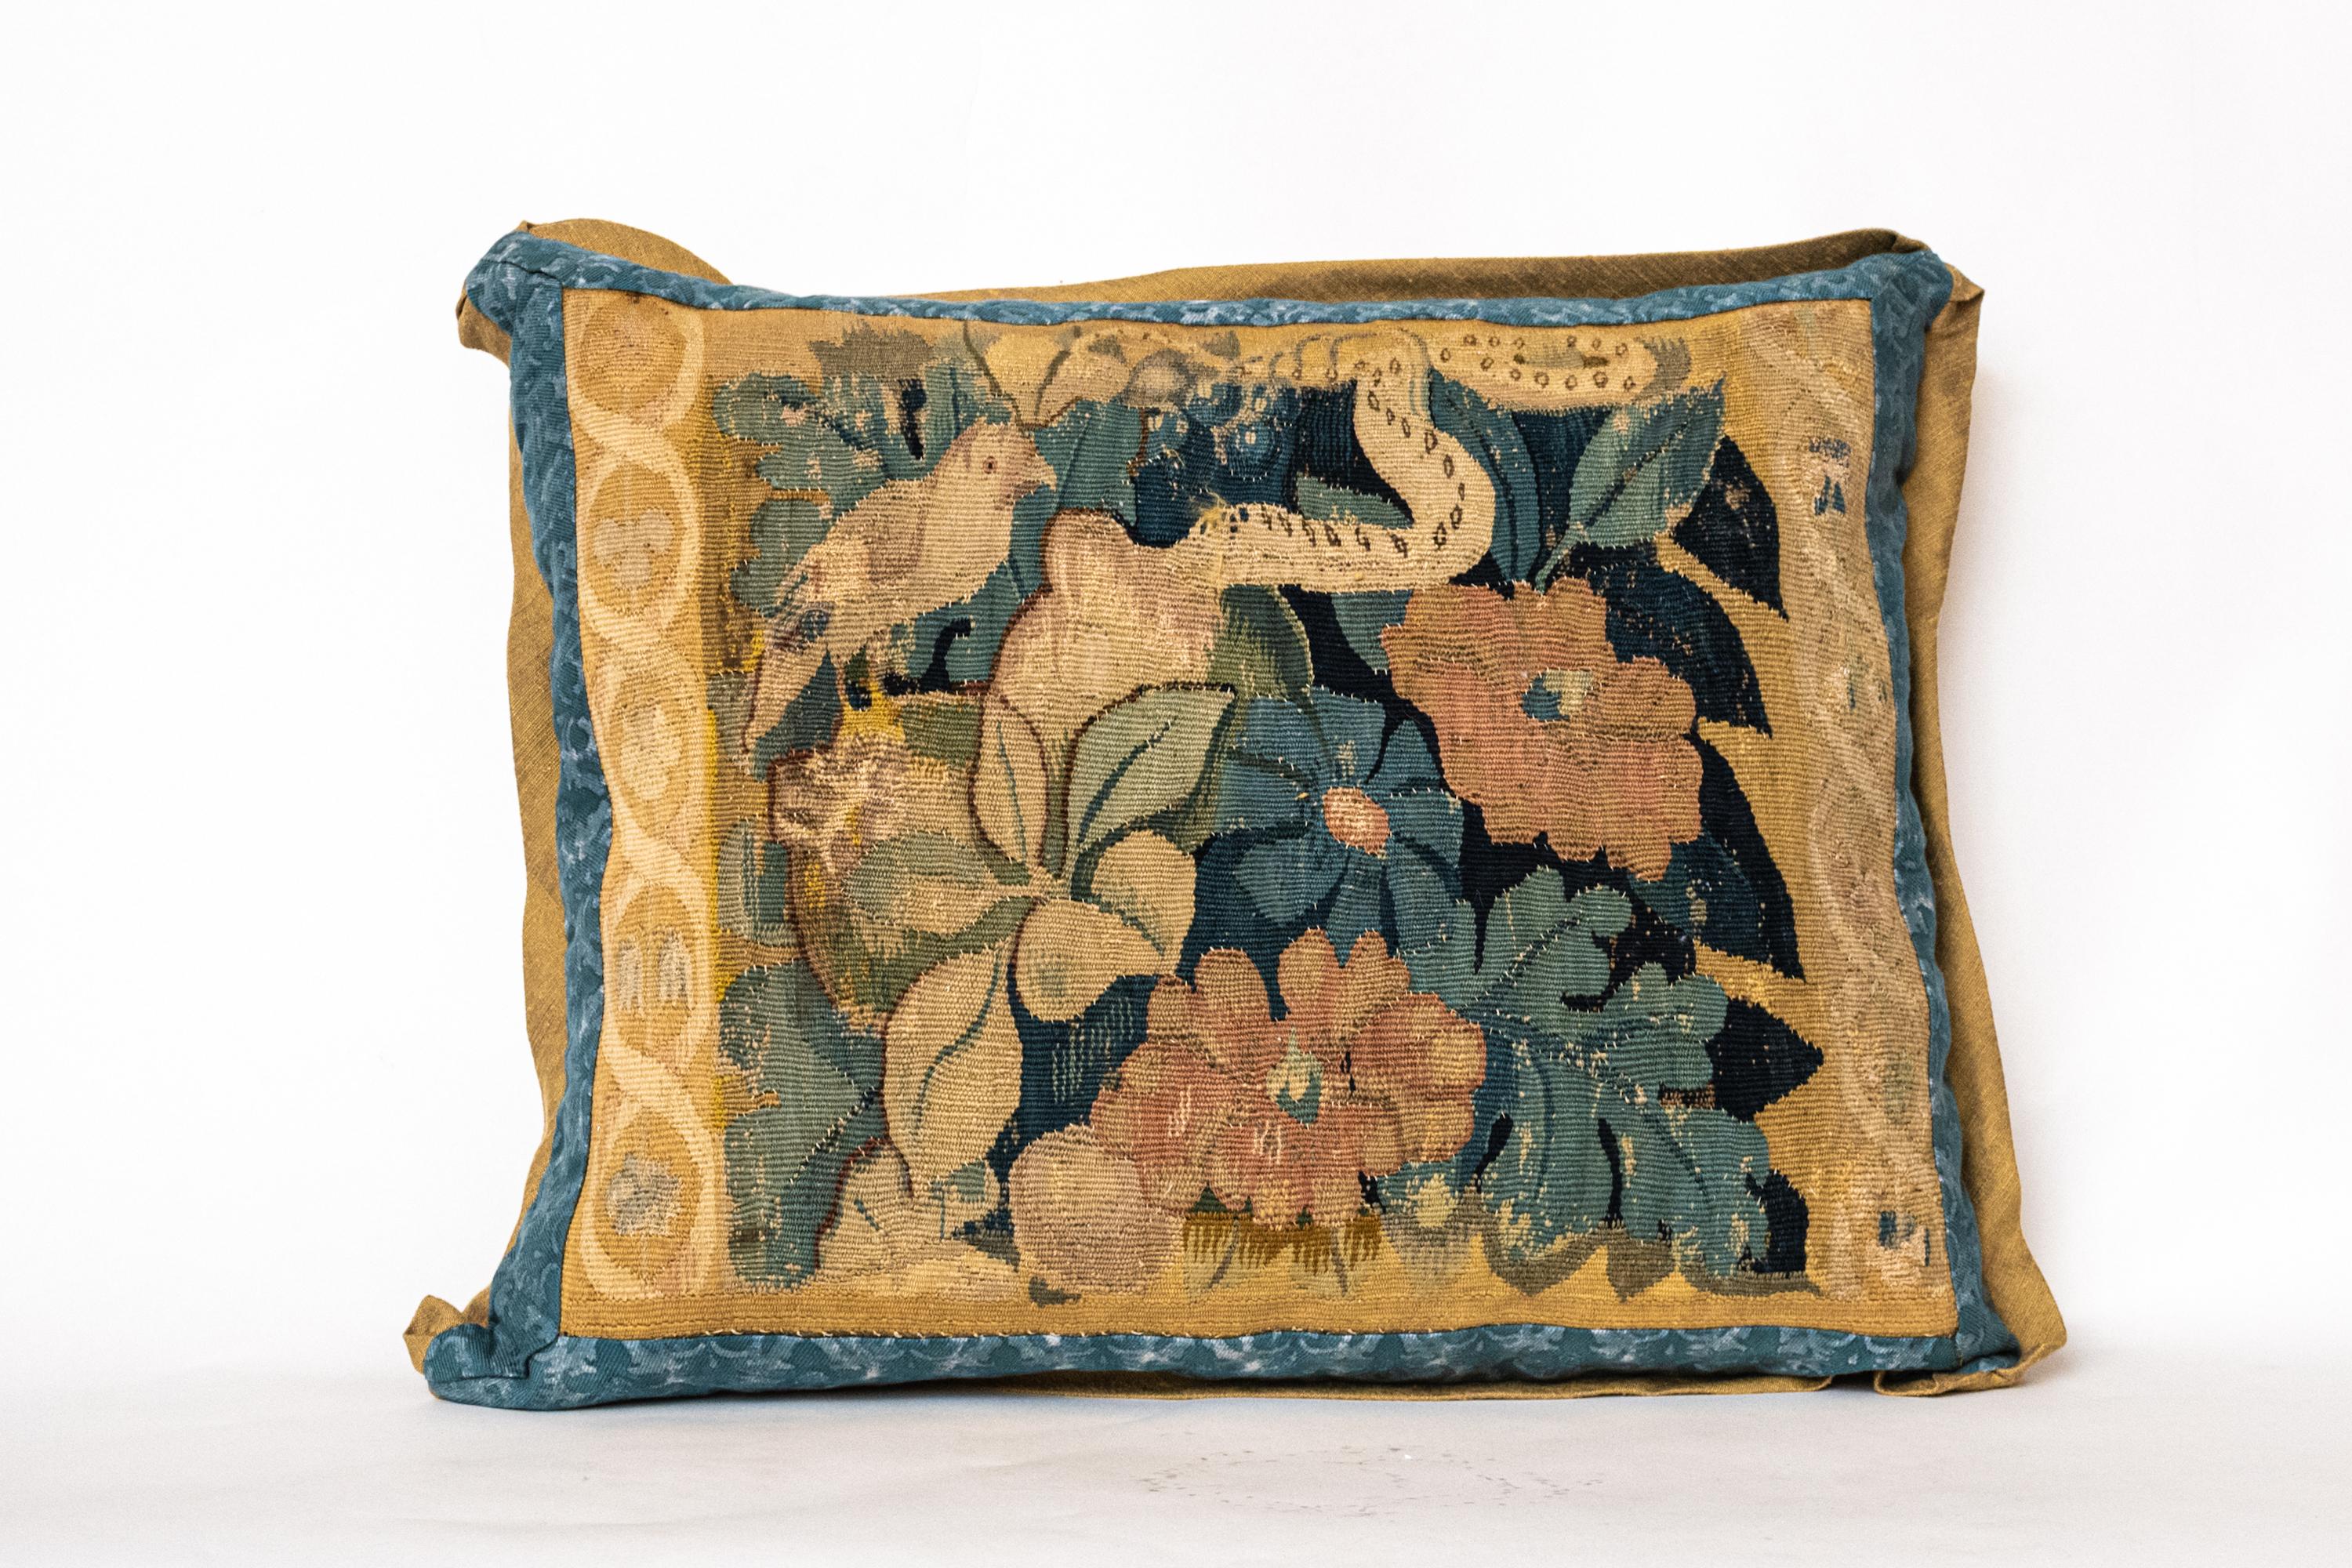 An antique textile Fortuny Cushion having the 17th century Brussels tapestry with classical design motifs of fauna and wildlife. Silk biased edges and backs with 50 down/50 feather insert. All sales are final.

